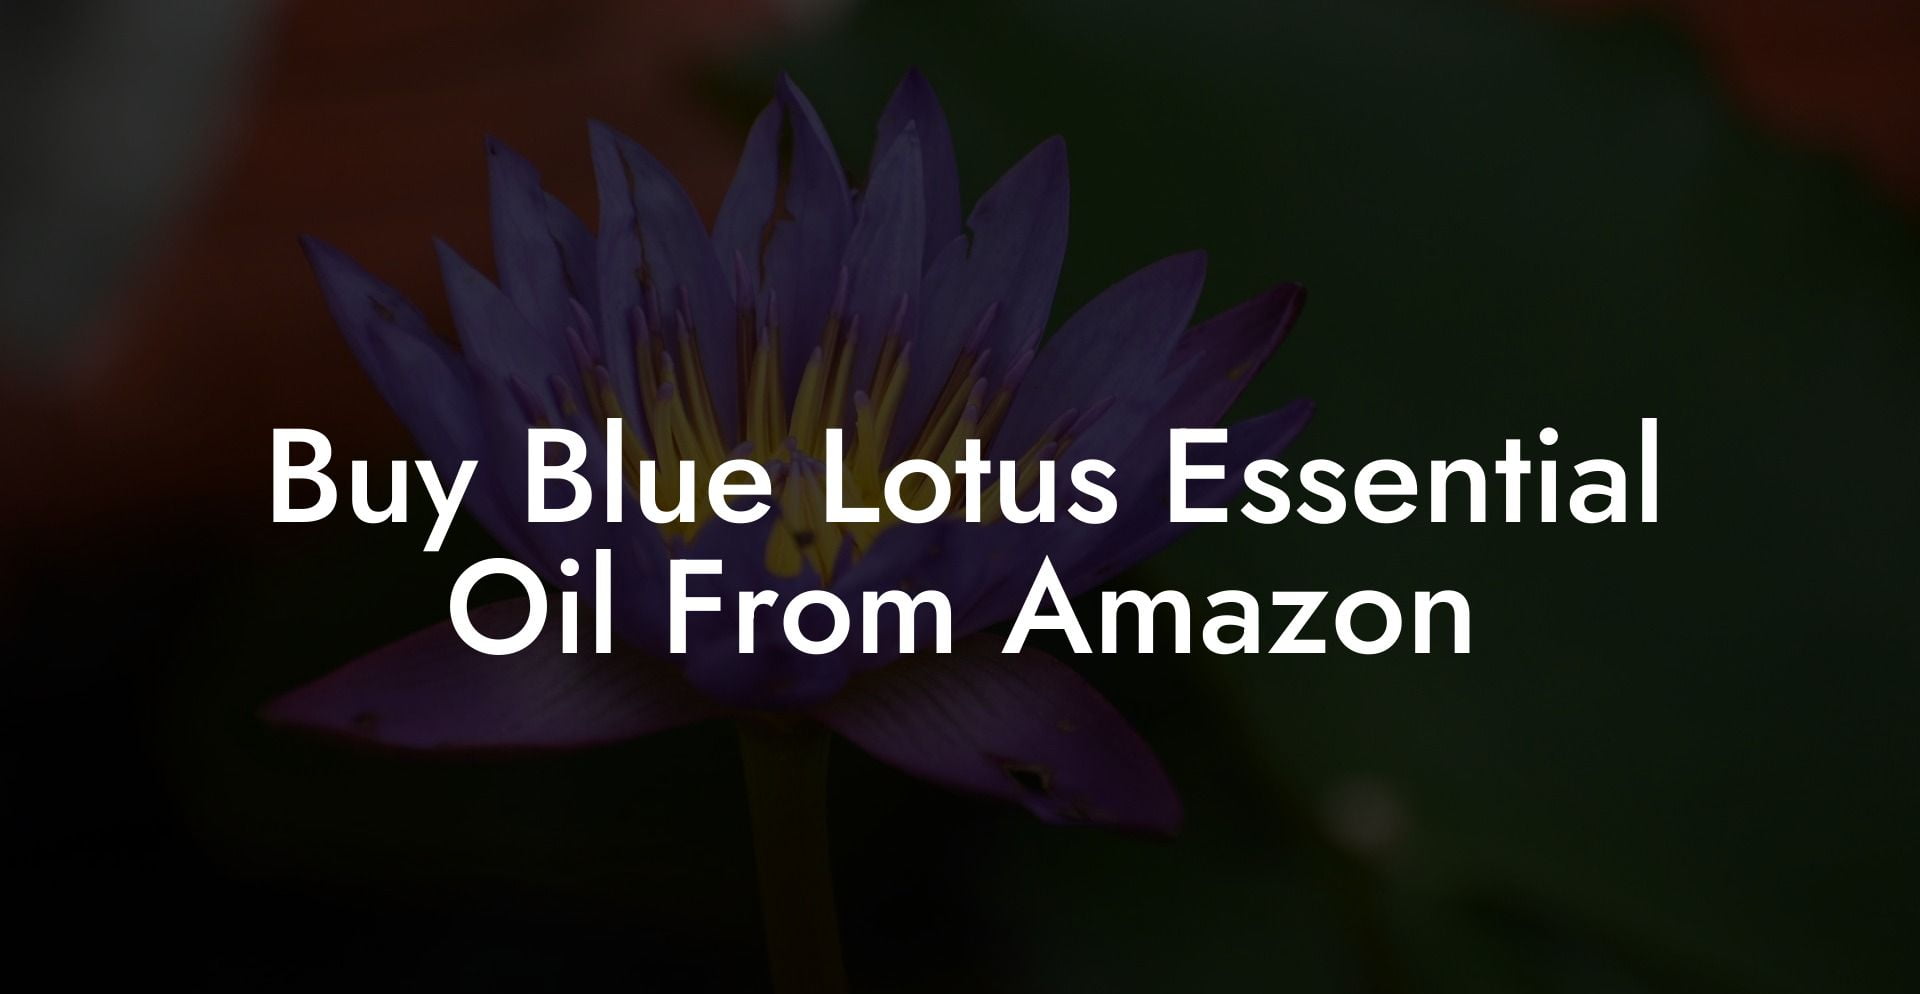 Buy Blue Lotus Essential Oil From Amazon